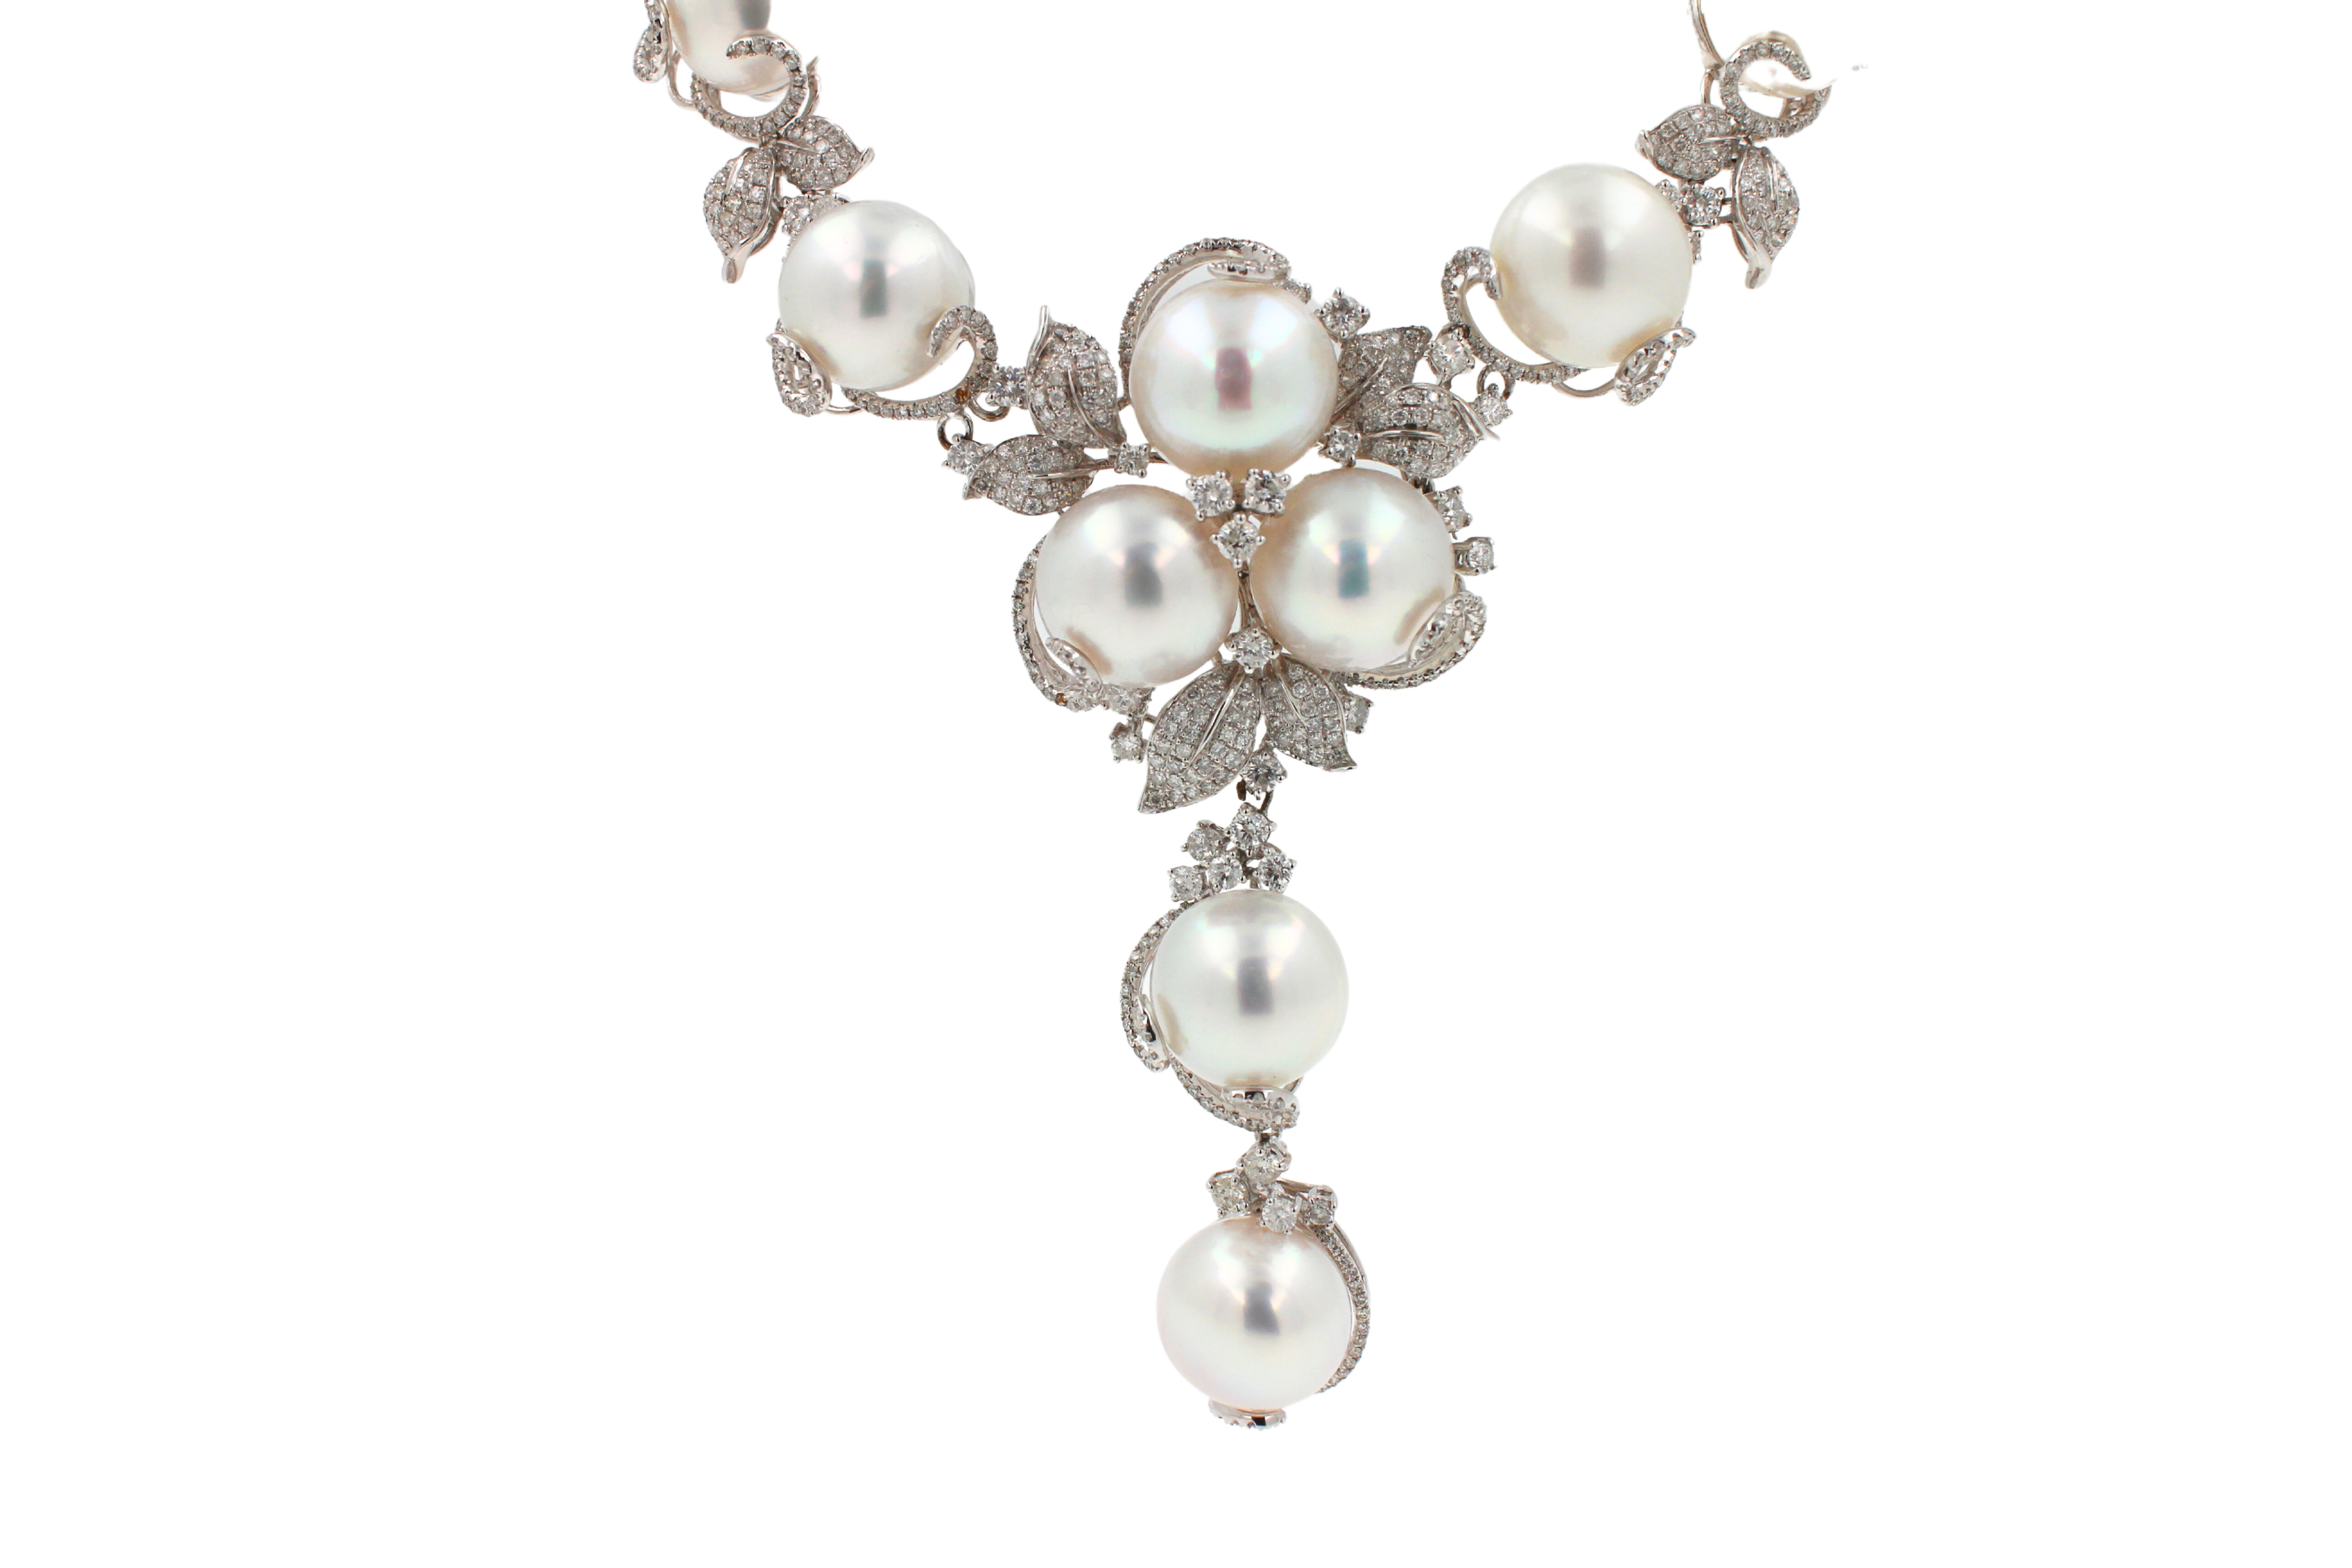 Beautiful Edwardian Style jewelry necklace. Very rare, unique and intricate handmade design that is one-of-a-kind and is not easily replicated. 

Full Details:
18 Karat White Gold
White South Sea Pearls 12-15mm Diameter Size
AAA Quality 
Mirror-like